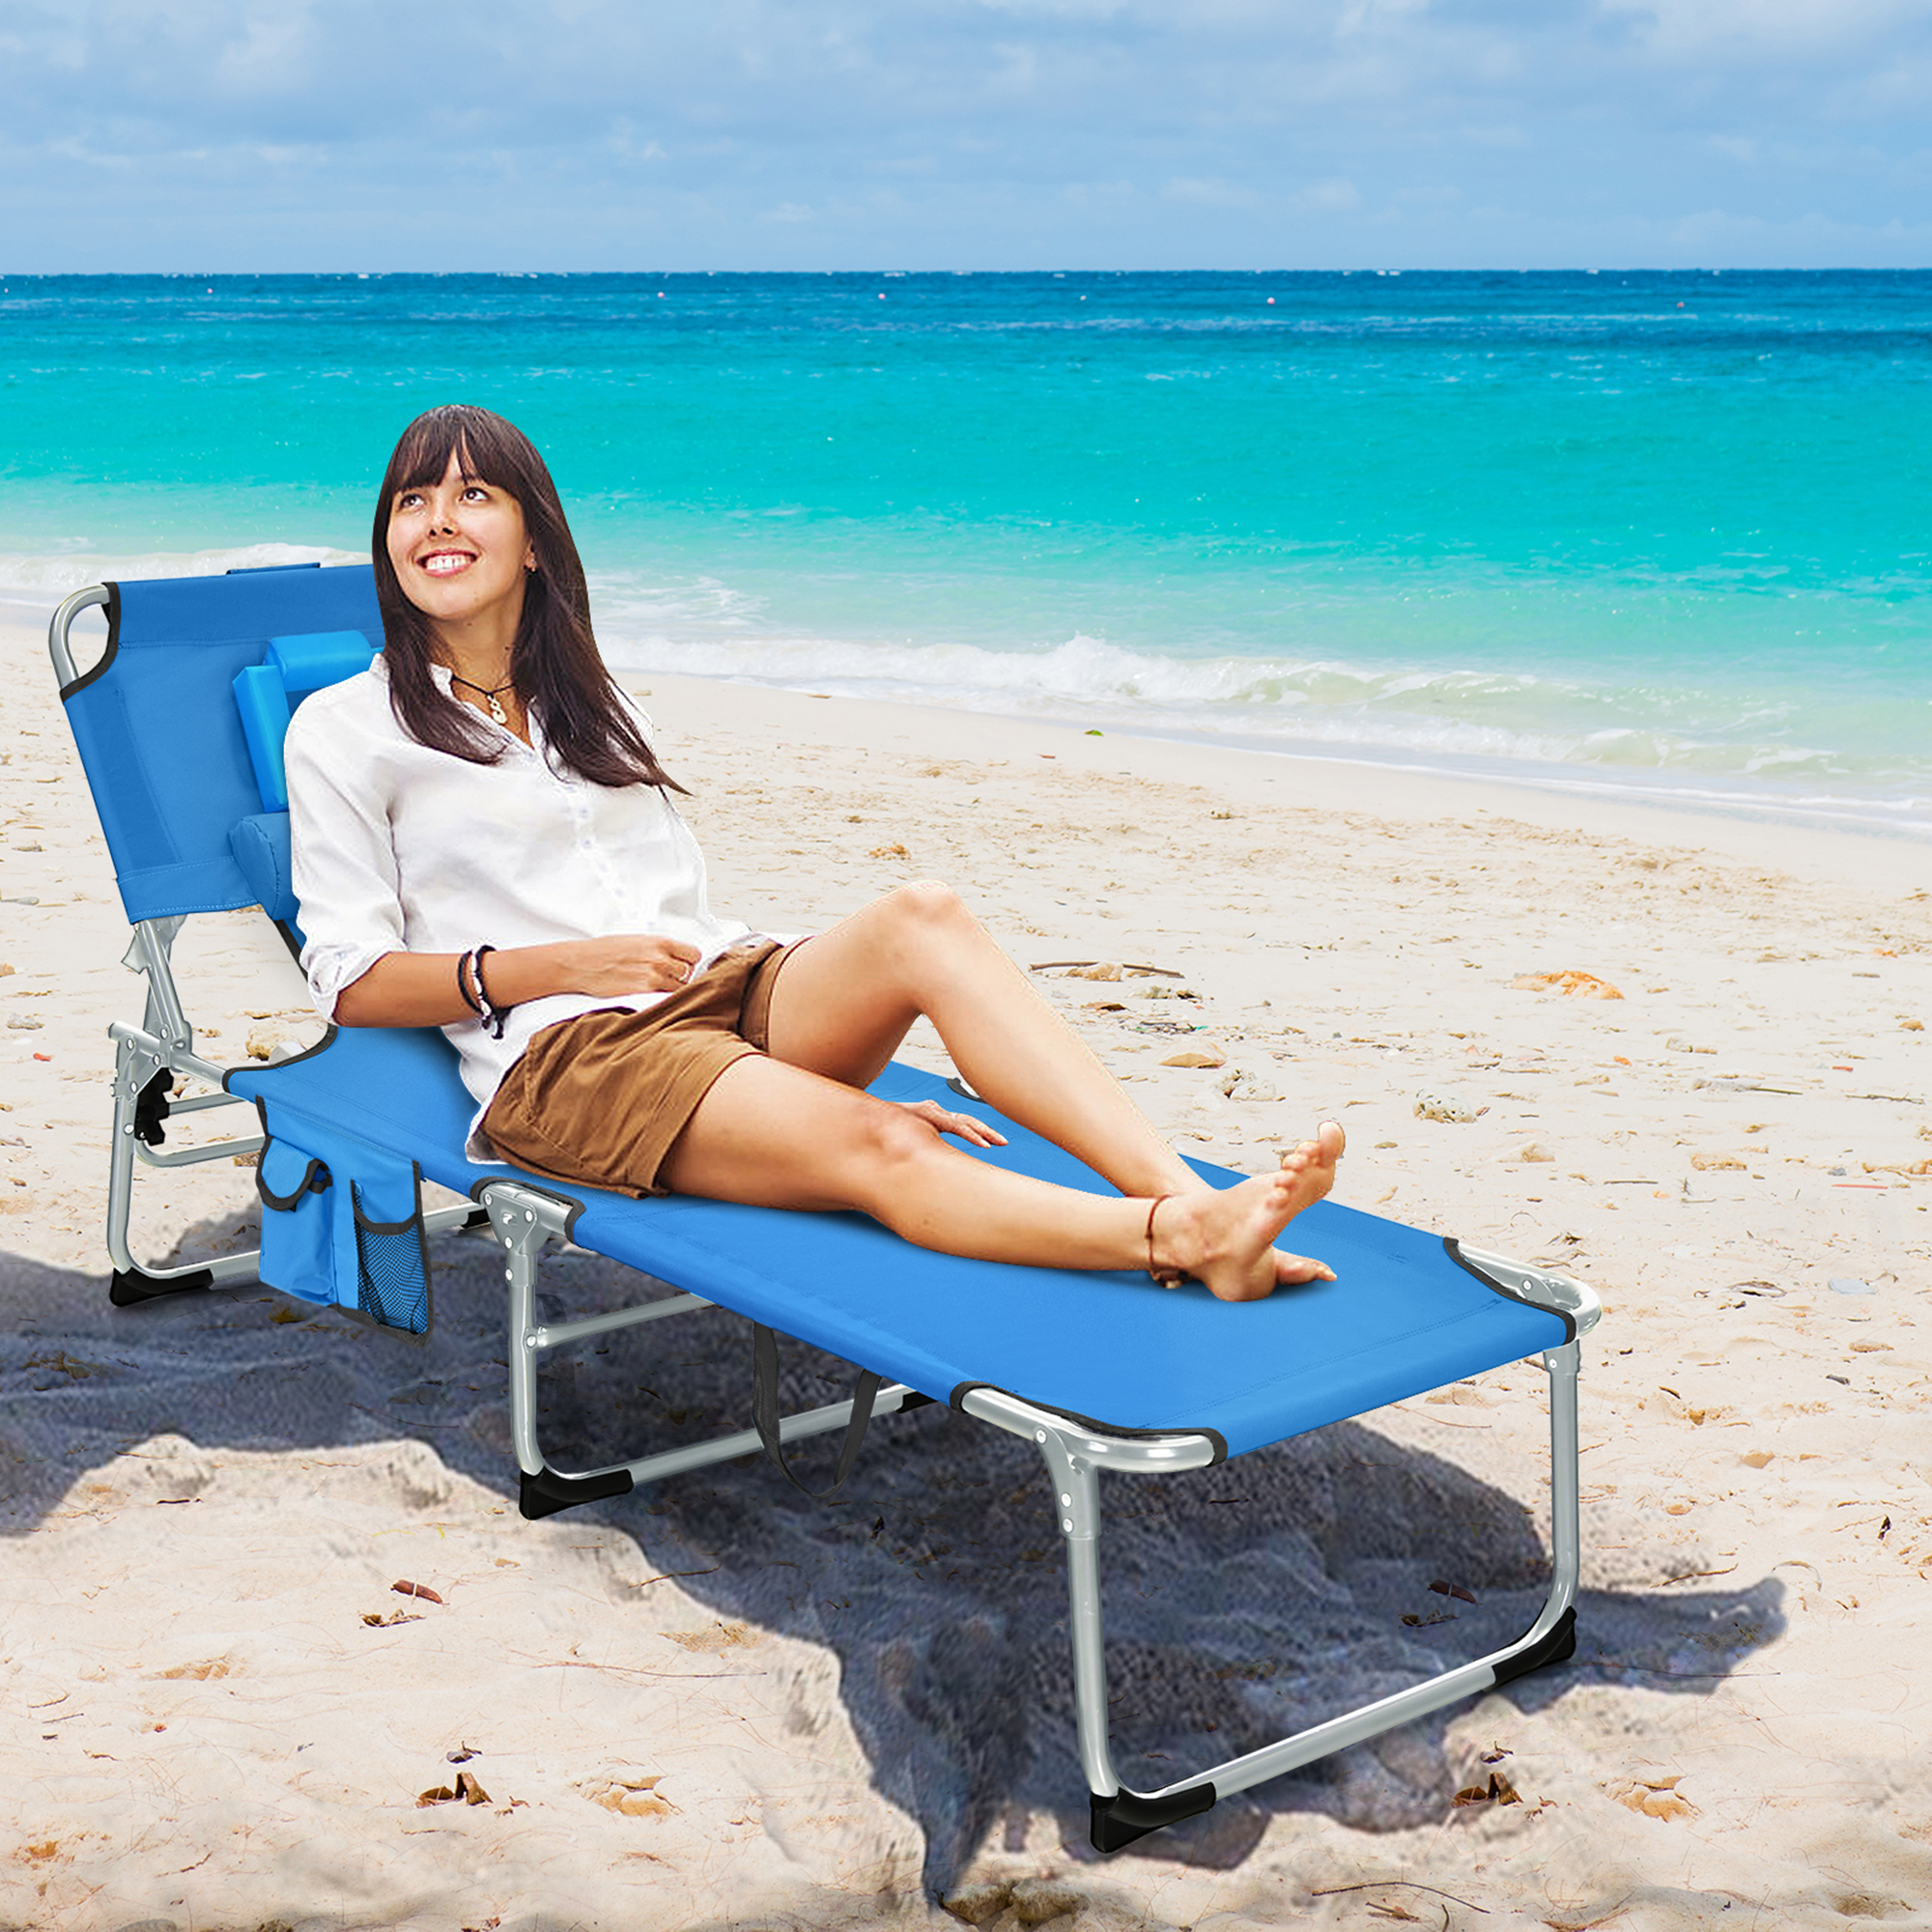 Gymax Portable Beach Chaise Lounge Chair Folding Reclining Chair w/ Facing Hole Blue - image 4 of 10